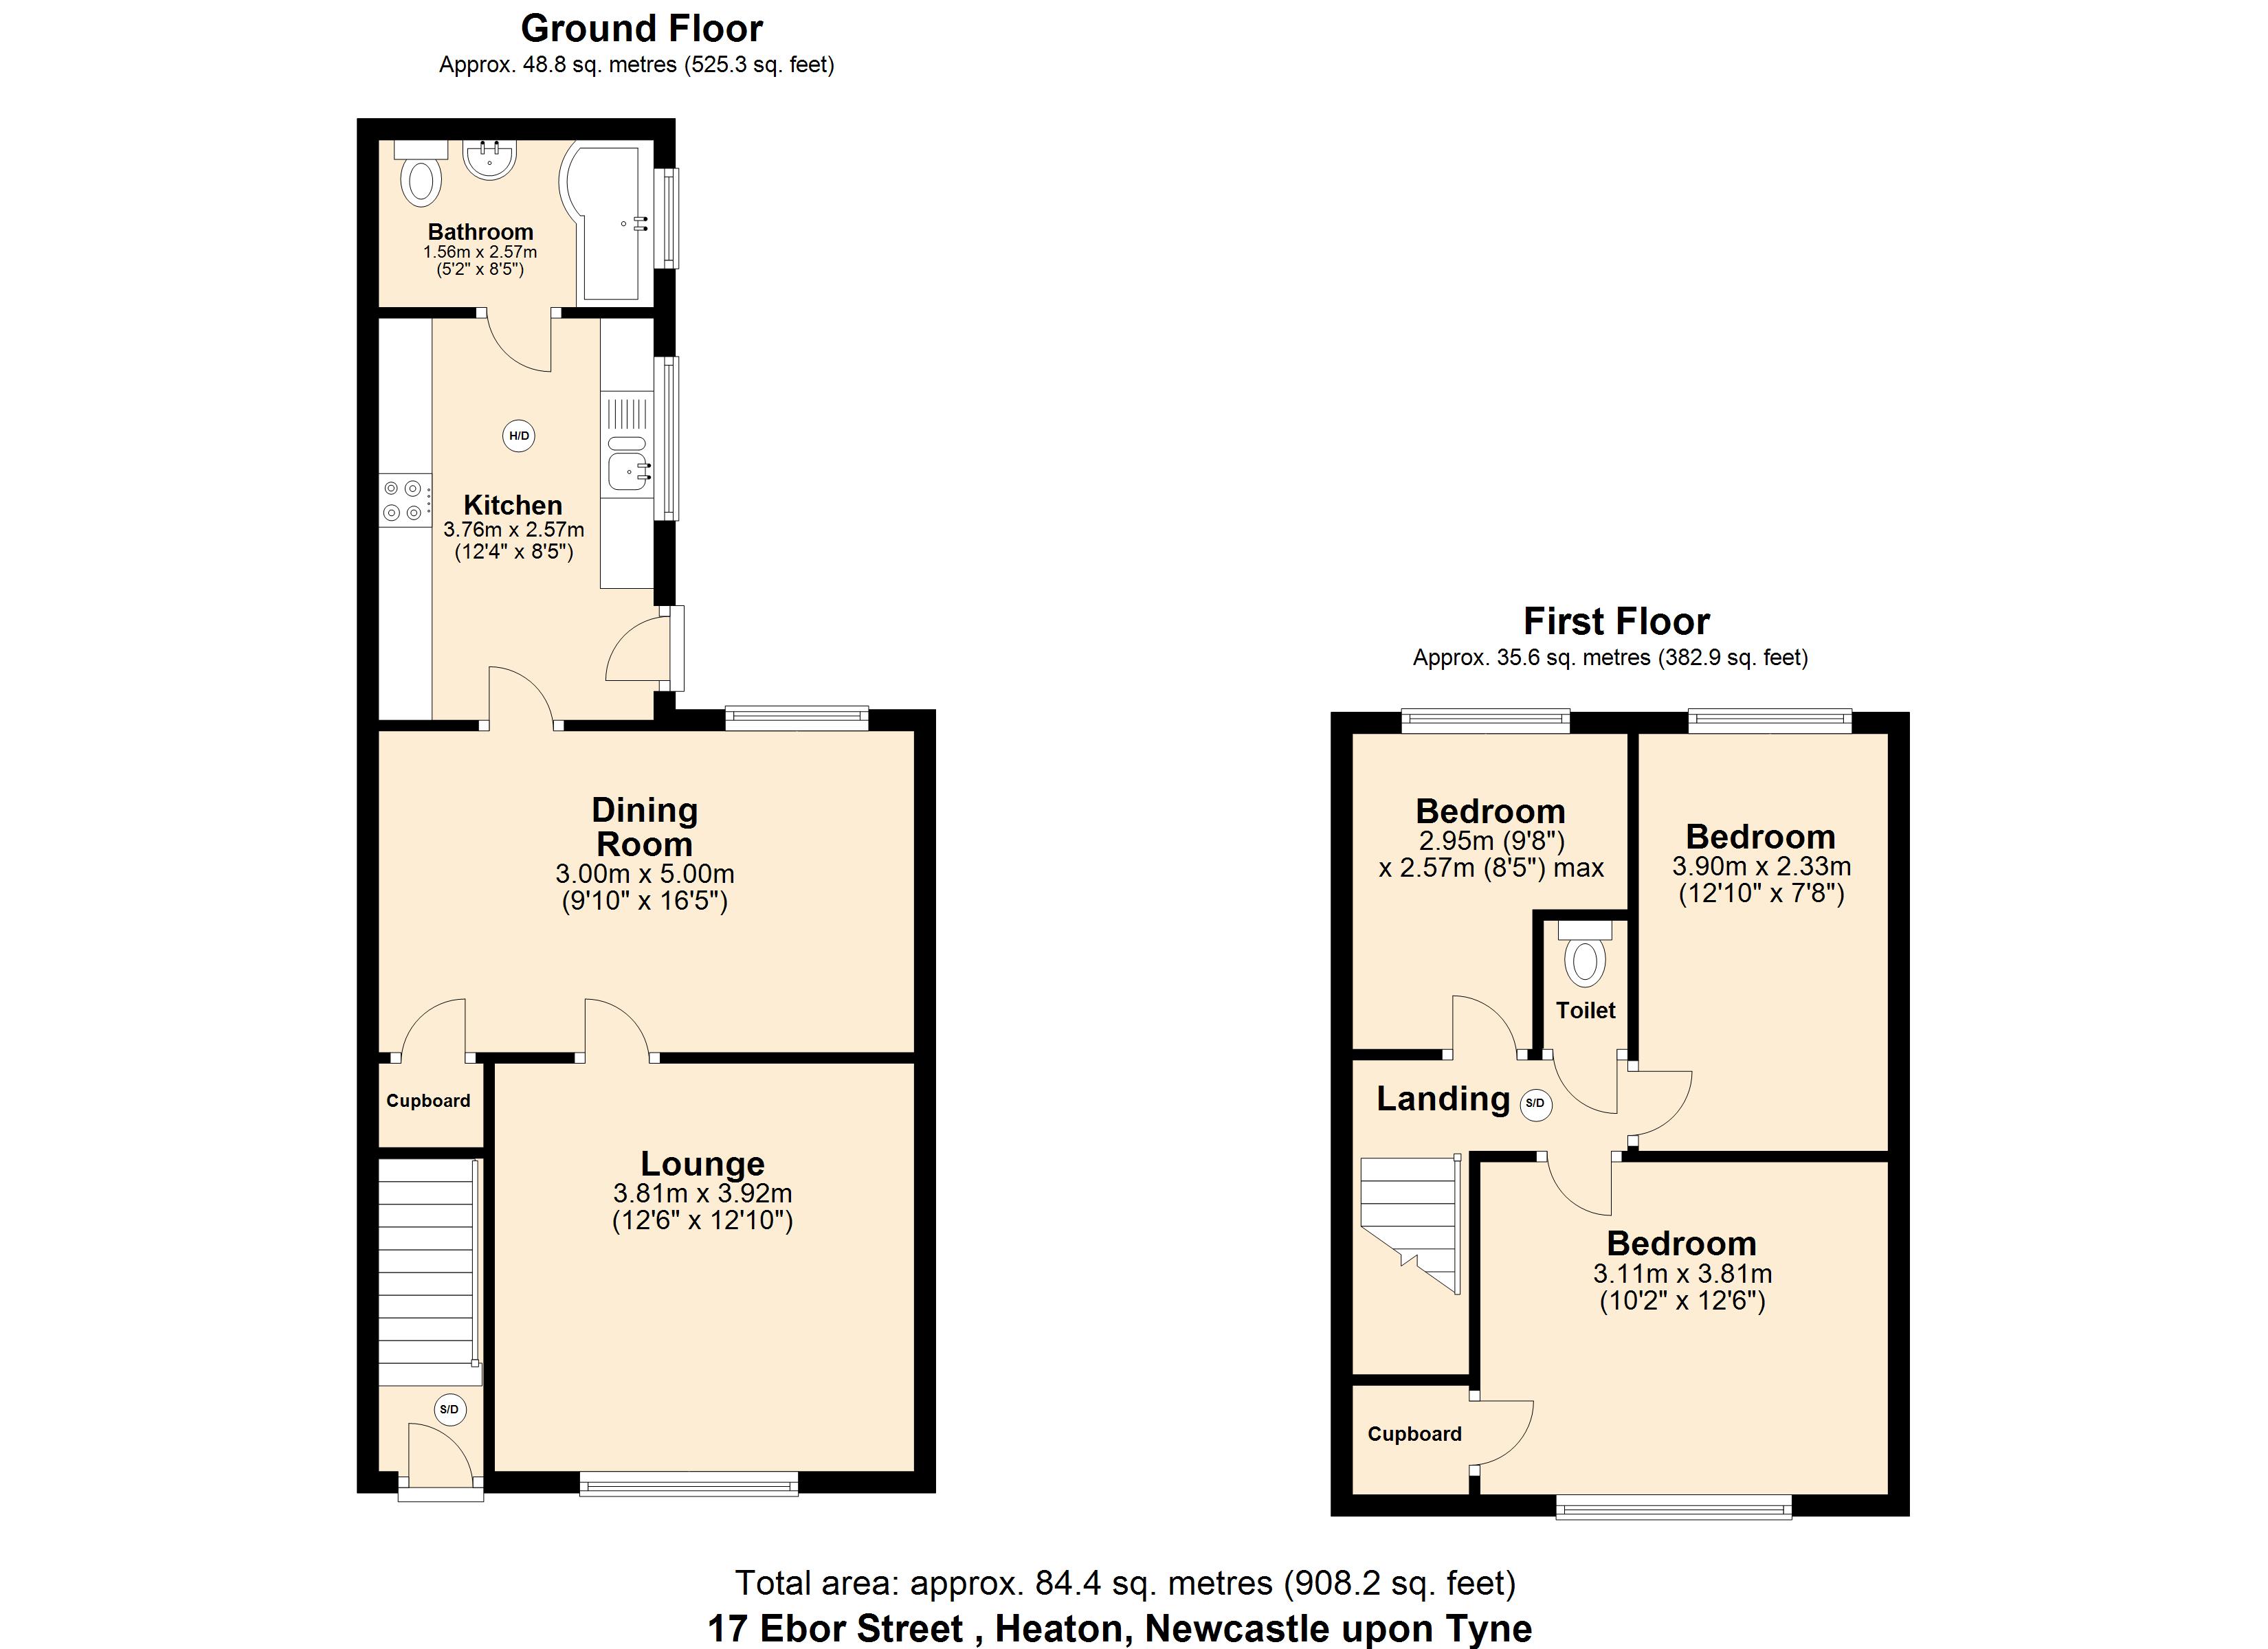 3 bed terraced house to rent in Ebor Street, Newcastle upon tyne - Property floorplan